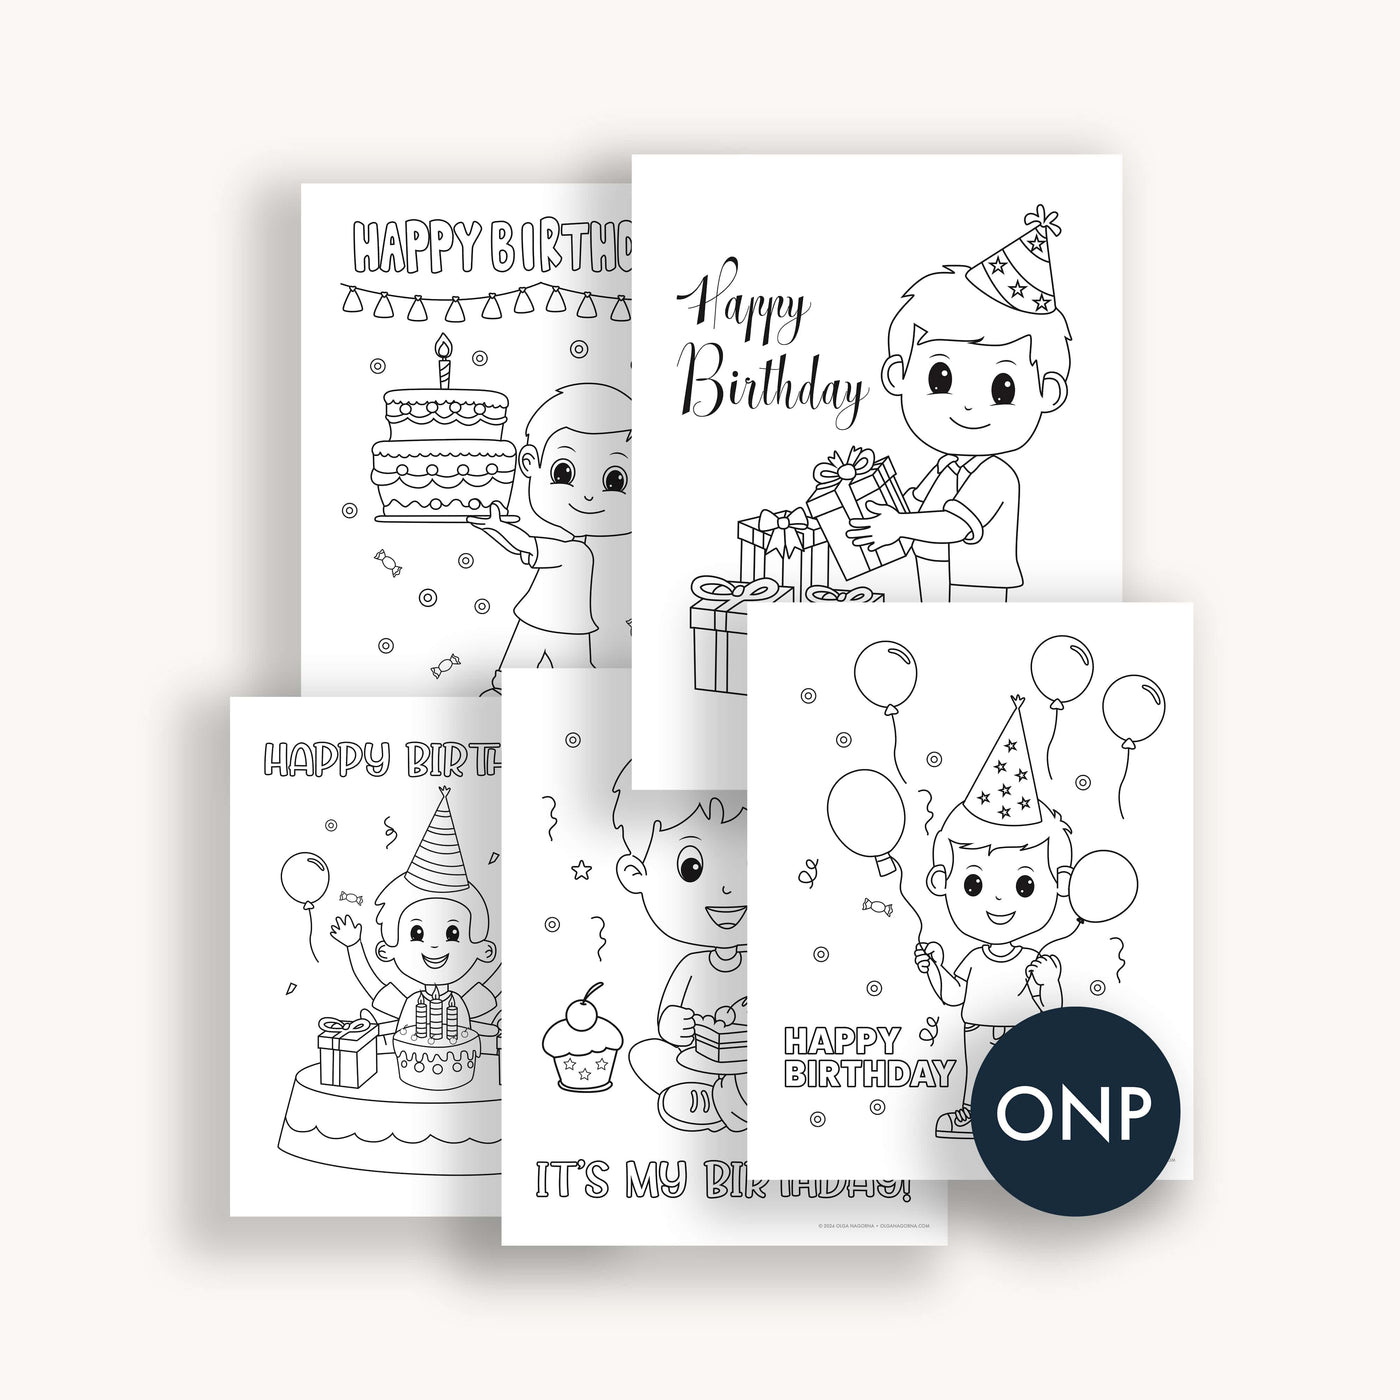 Birthday Coloring Pages for boys in black and white. A digital download, printable.